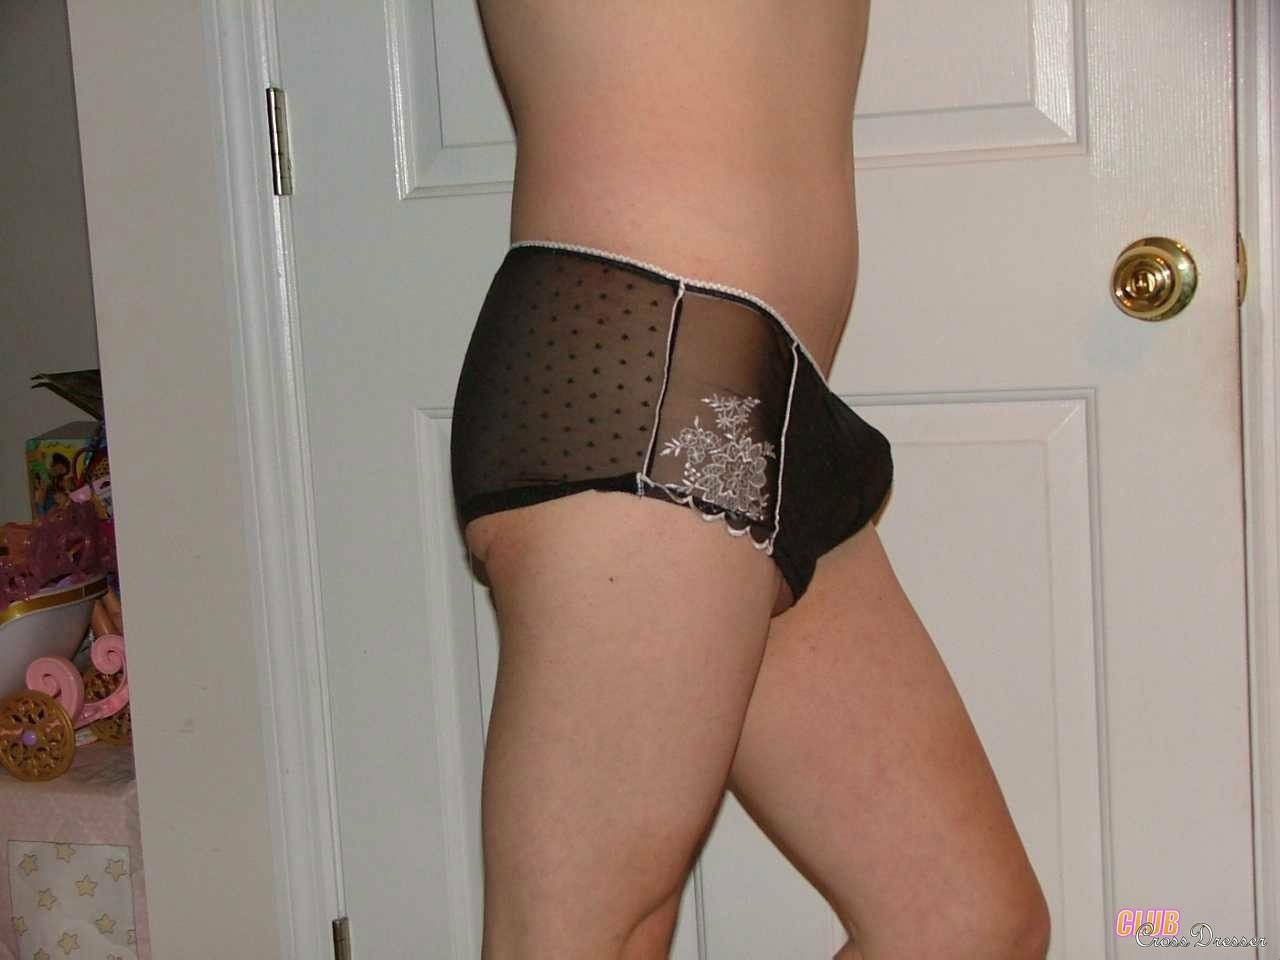 Sexy Club Cross Dresser Pictures